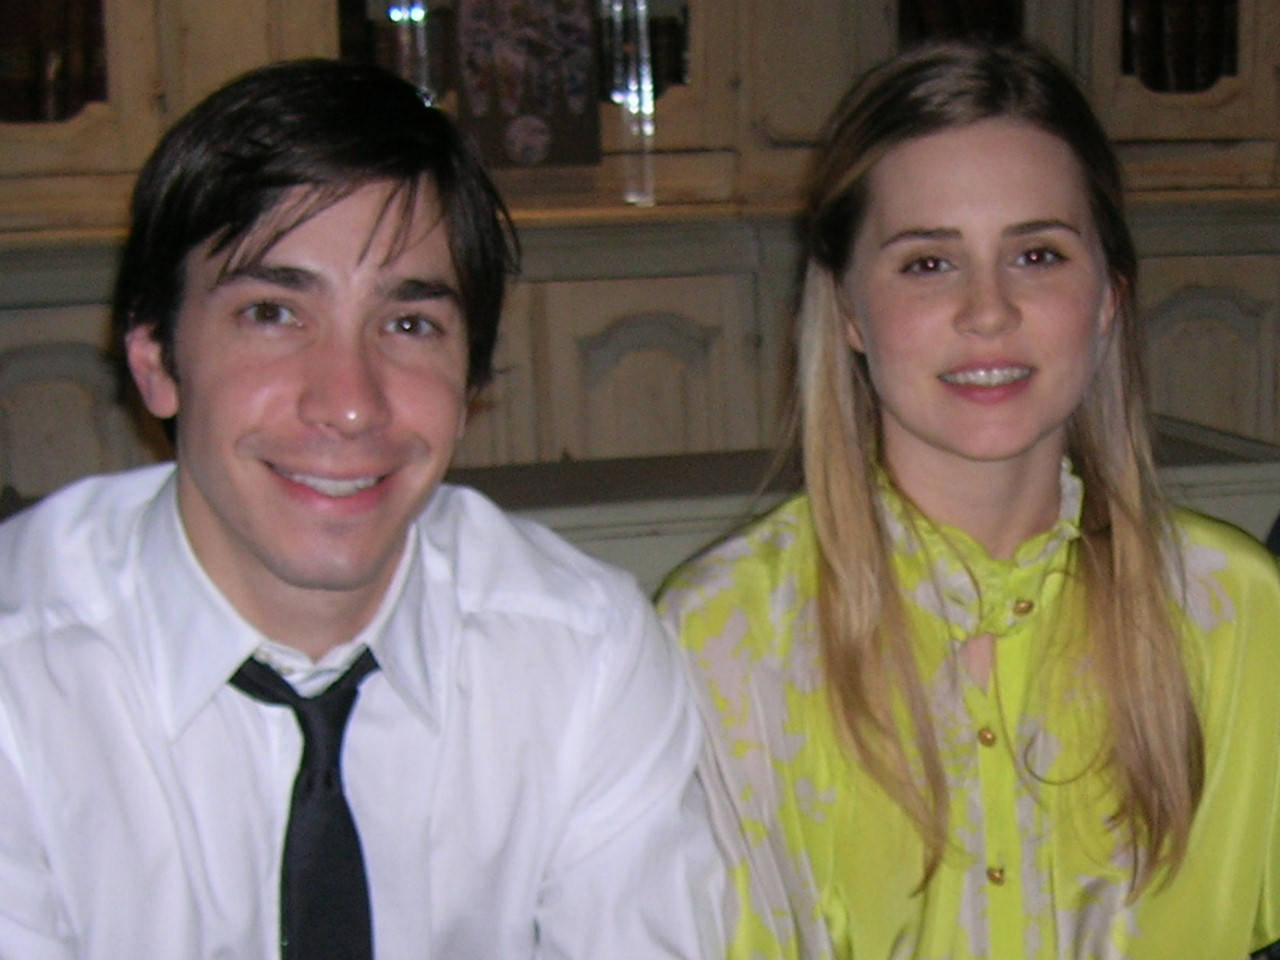 Alison Lohman and Justin Long posing at an American event Wallpaper